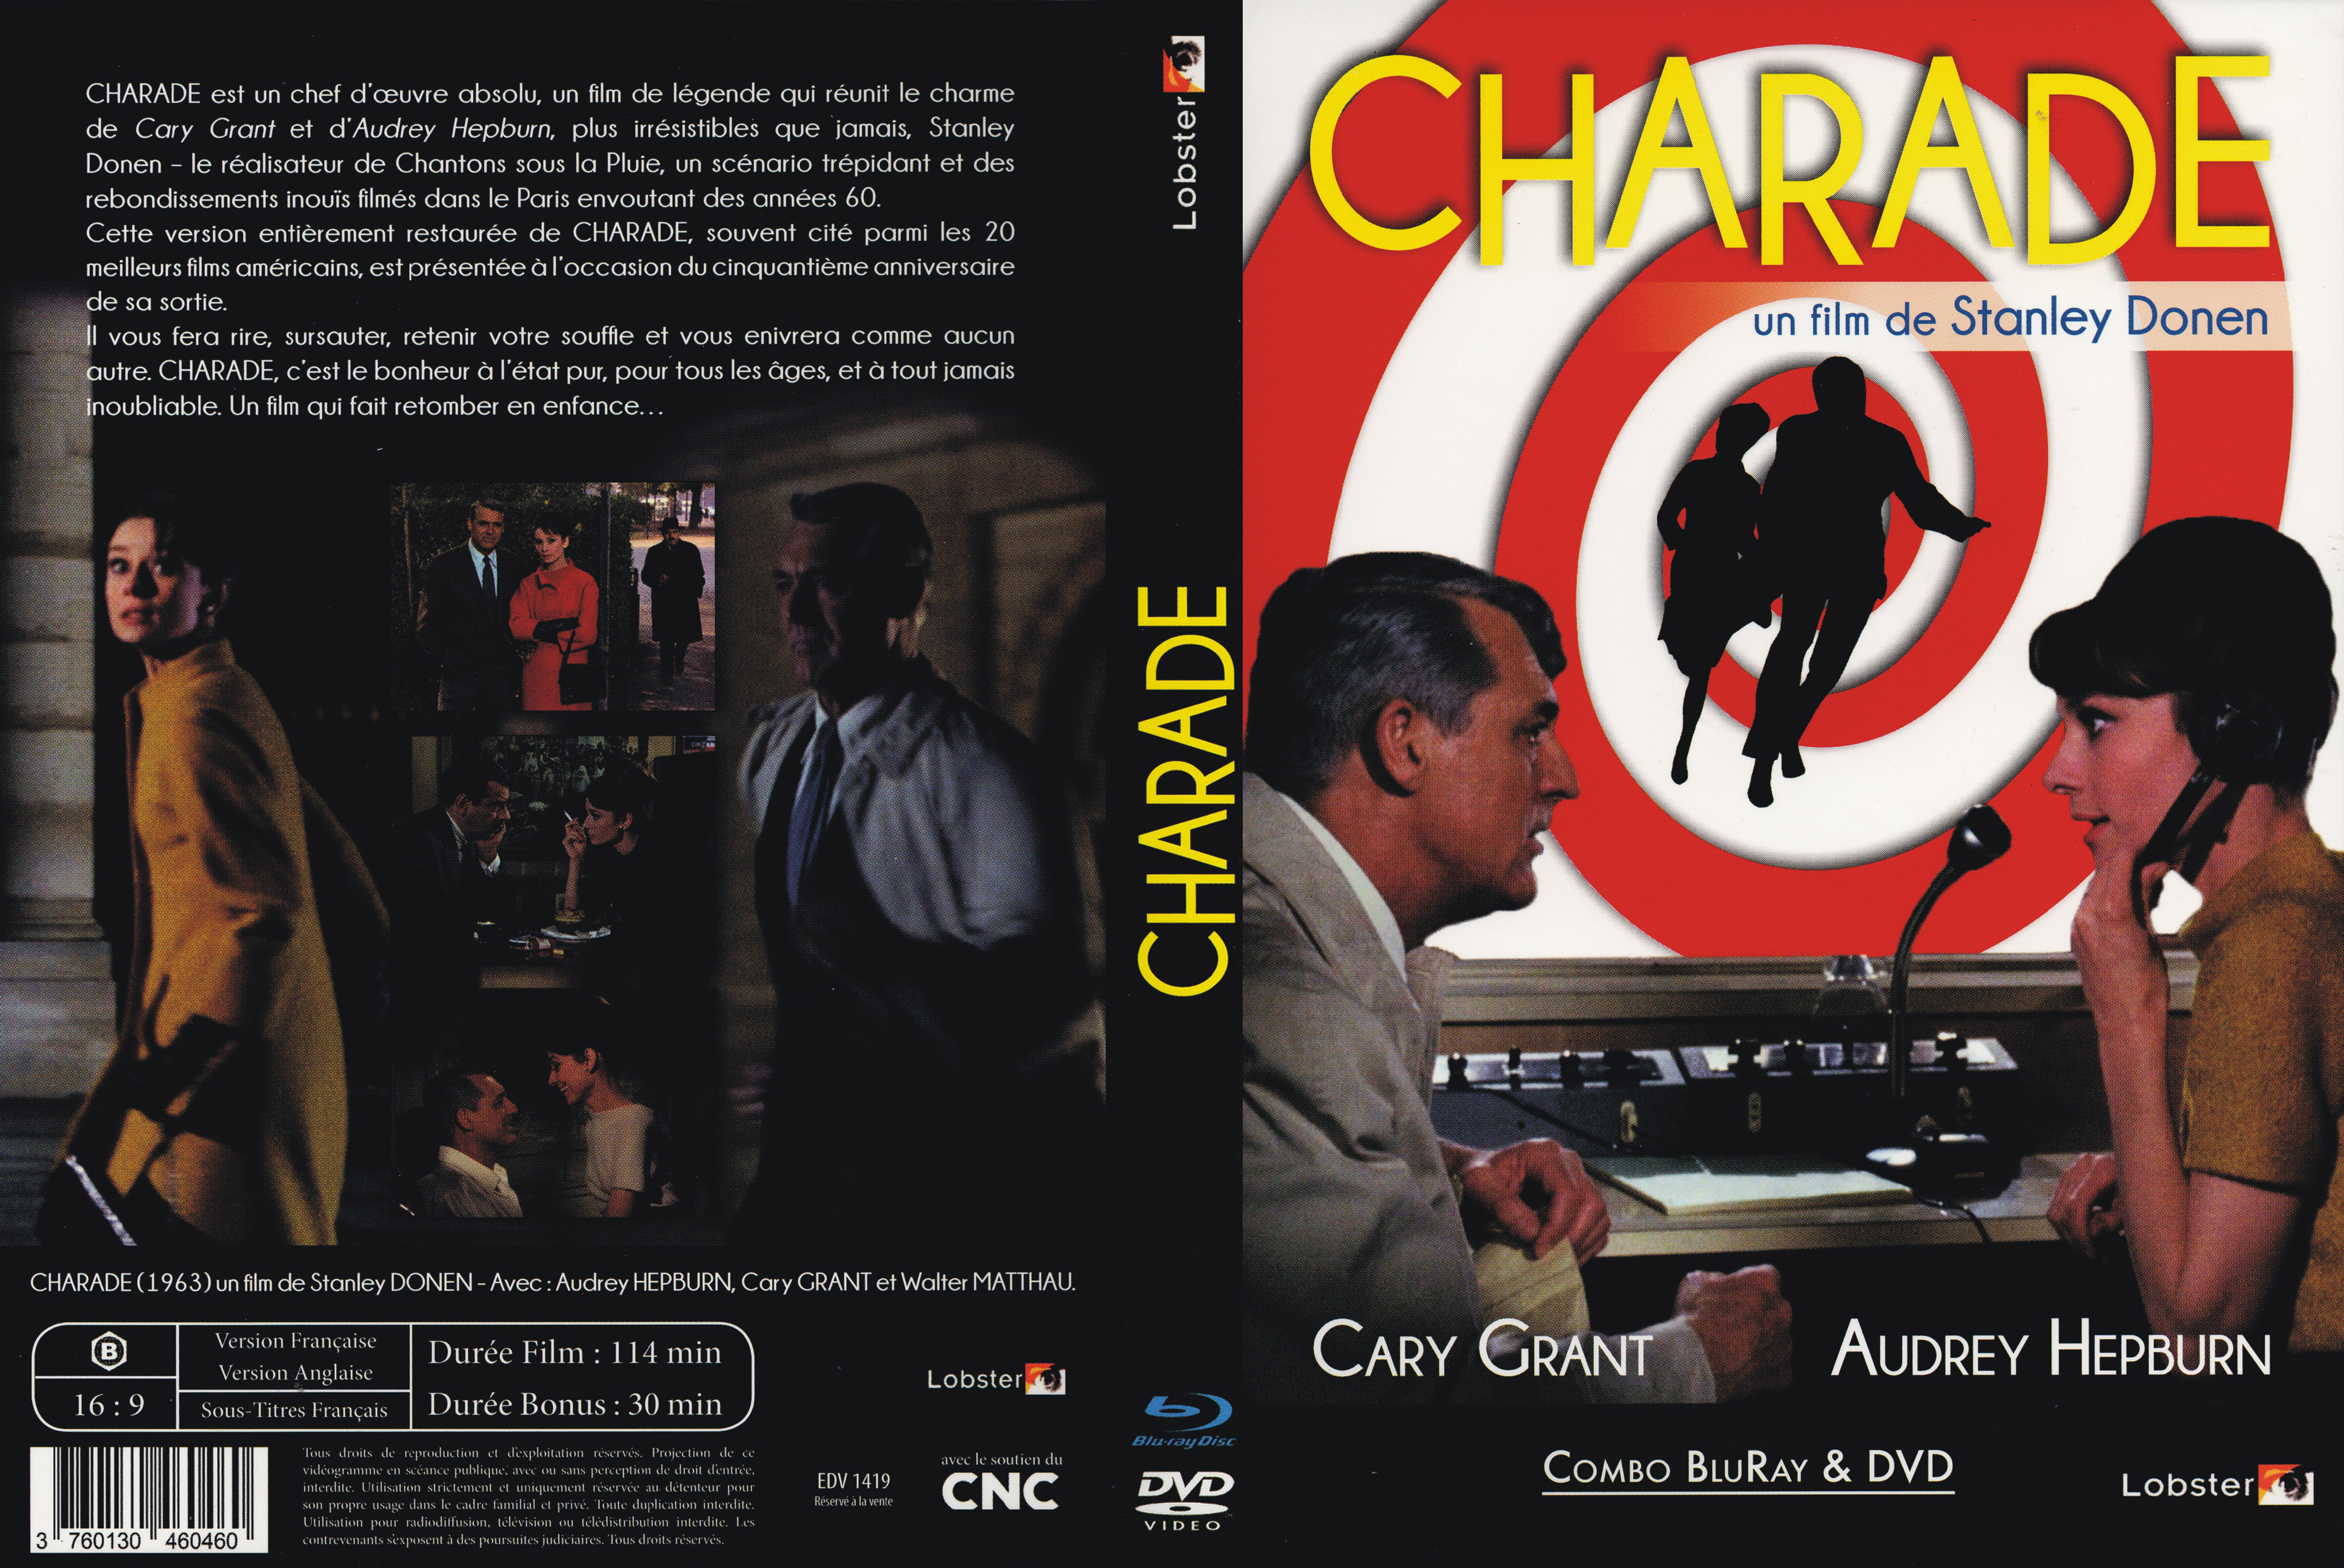 Jaquette DVD Charade (BLU-RAY)